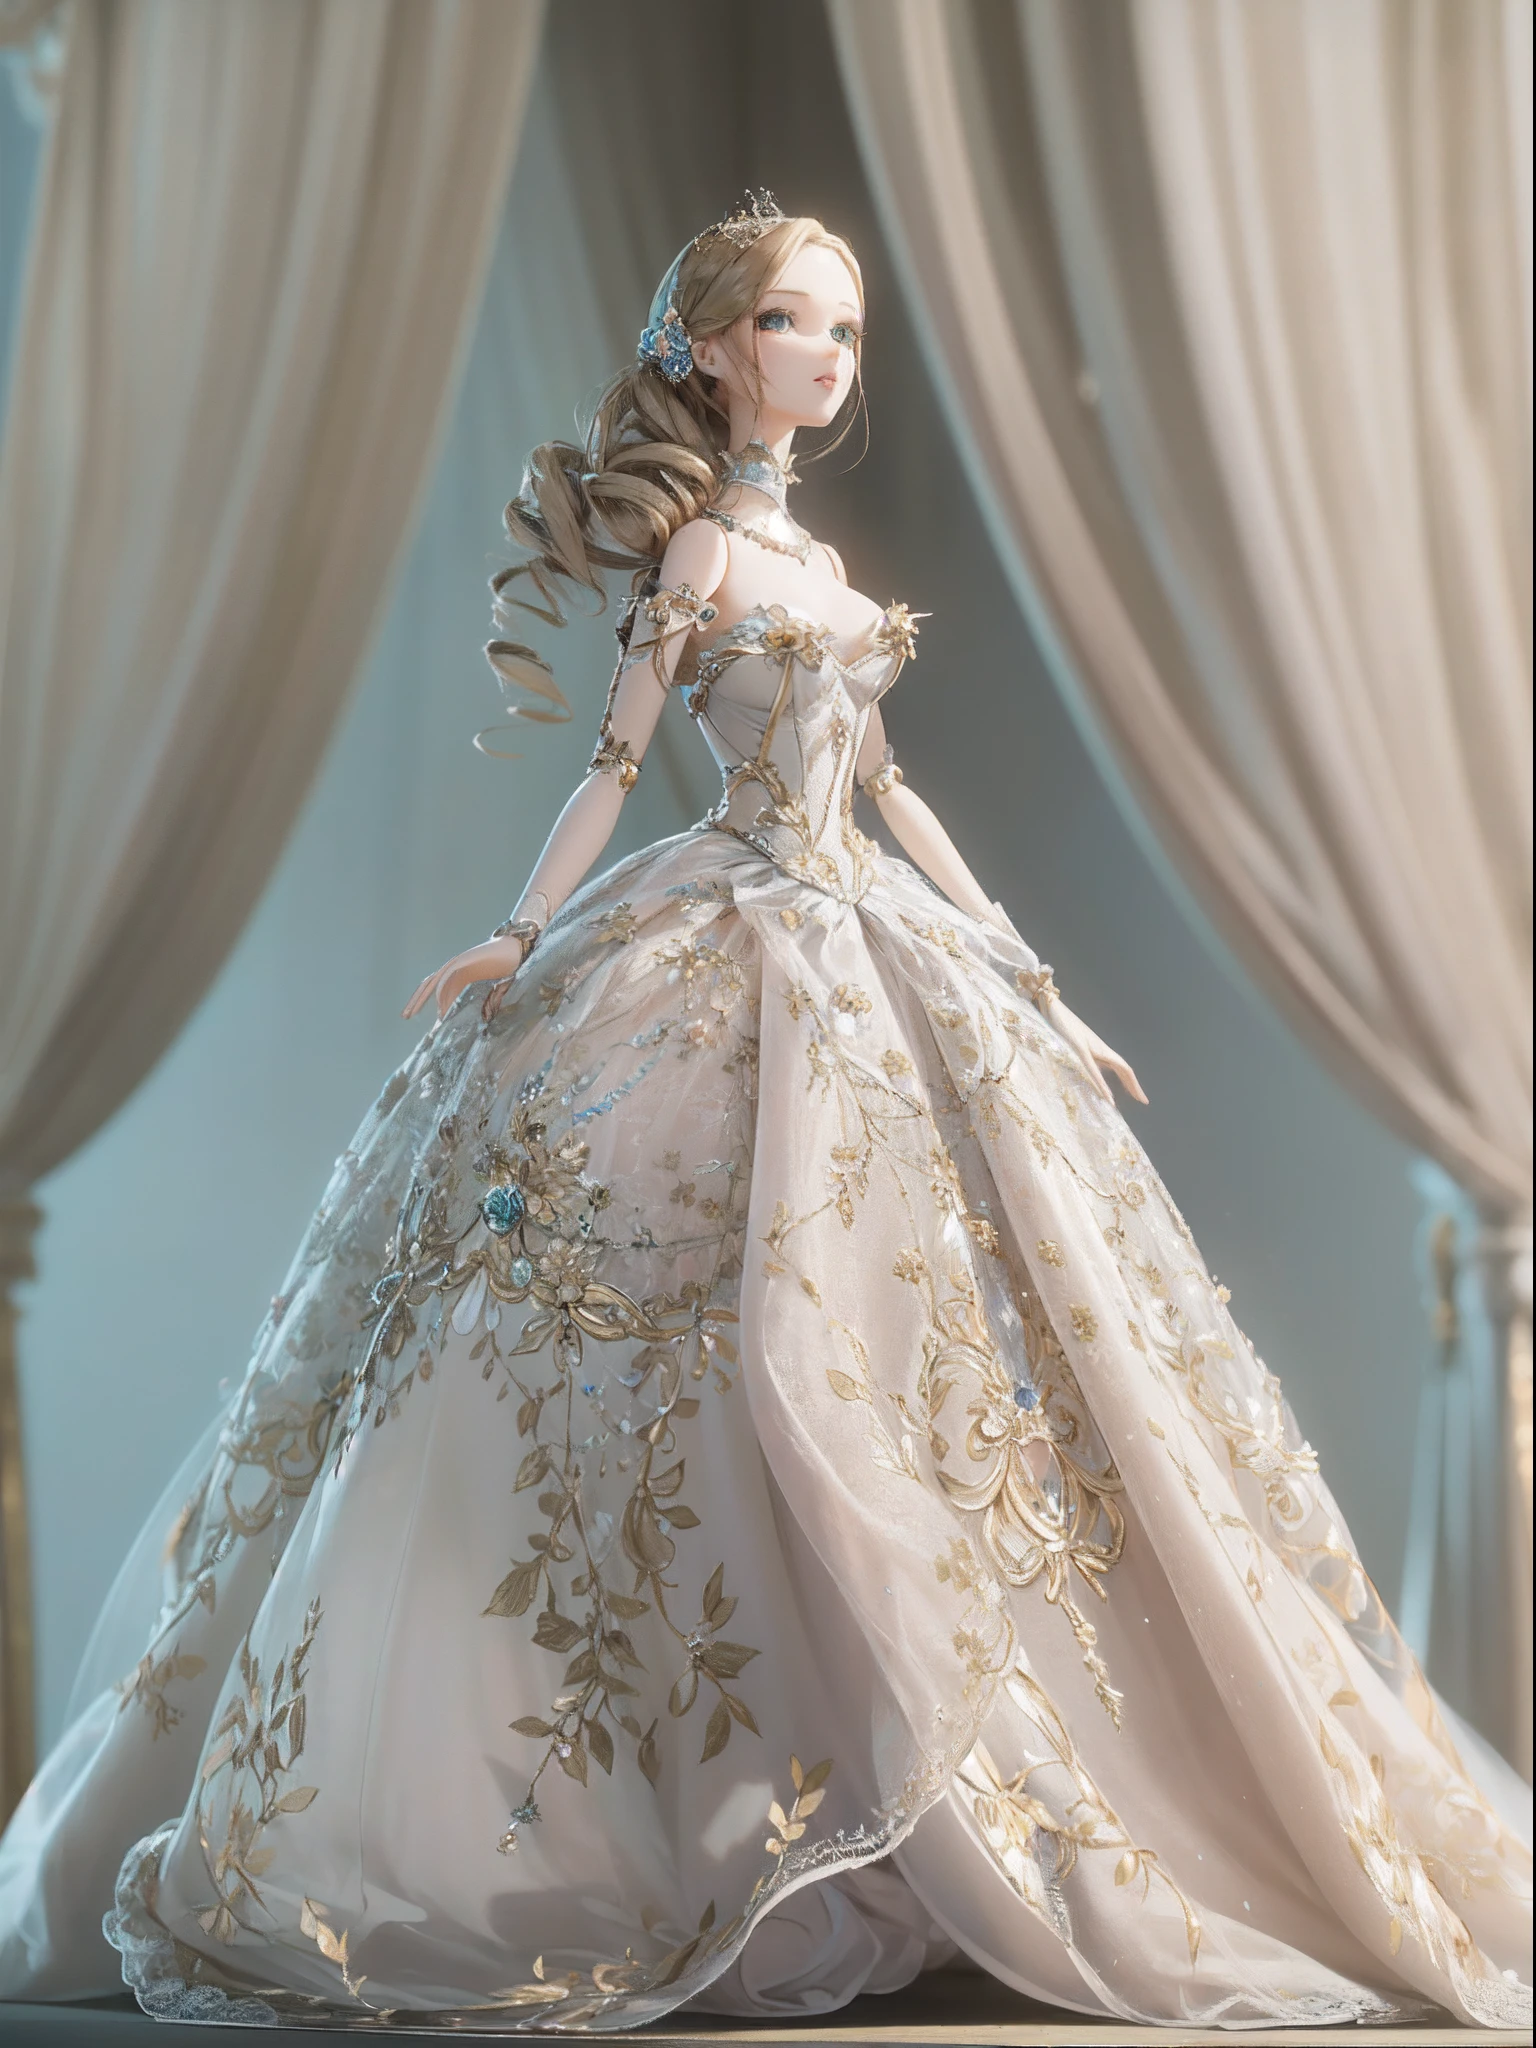 In a soft 3D rendering. (a beautiful ball-jointed doll stands gracefully:1.2). She is dressed in a luxurious gown, the fabric flowing elegantly around her. The doll's delicate features are expertly crafted, and she exudes an air of sophistication and refinement. It's a stunning image, full of beauty and detail.